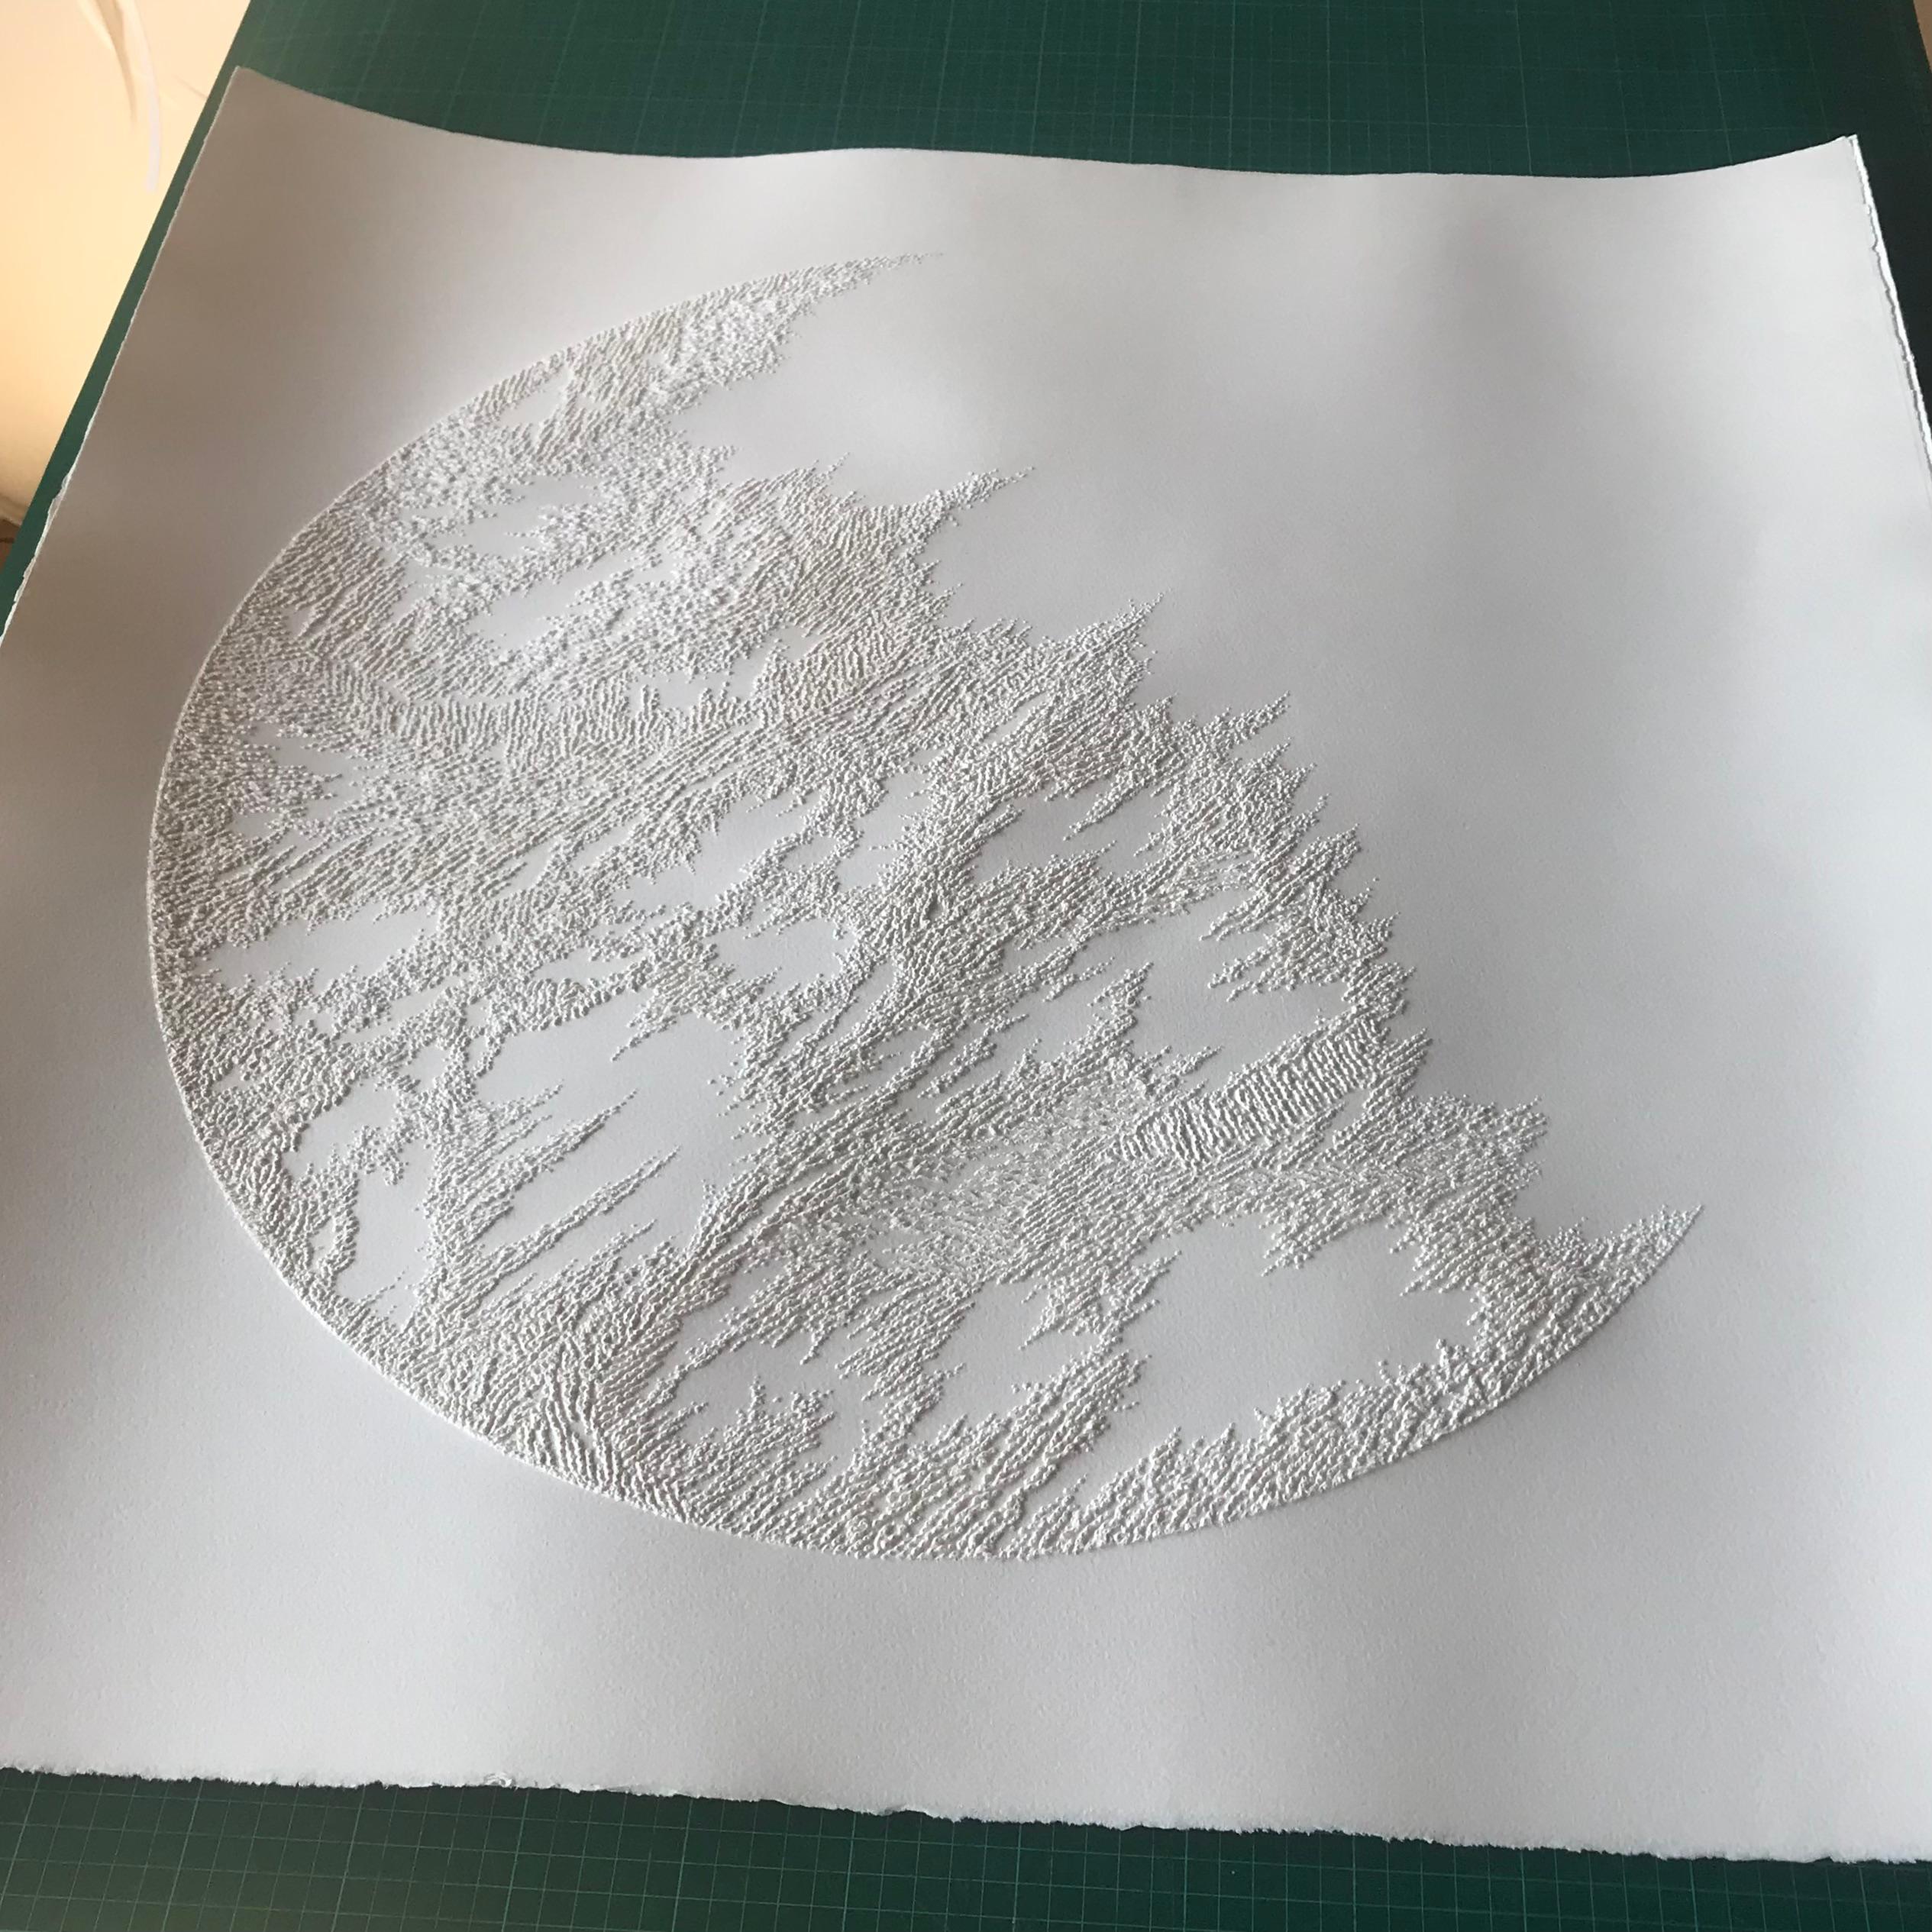 Moon 1 - intricate white 3D abstract geometric circle pulled paper drawing  - Art by Antonin Anzil